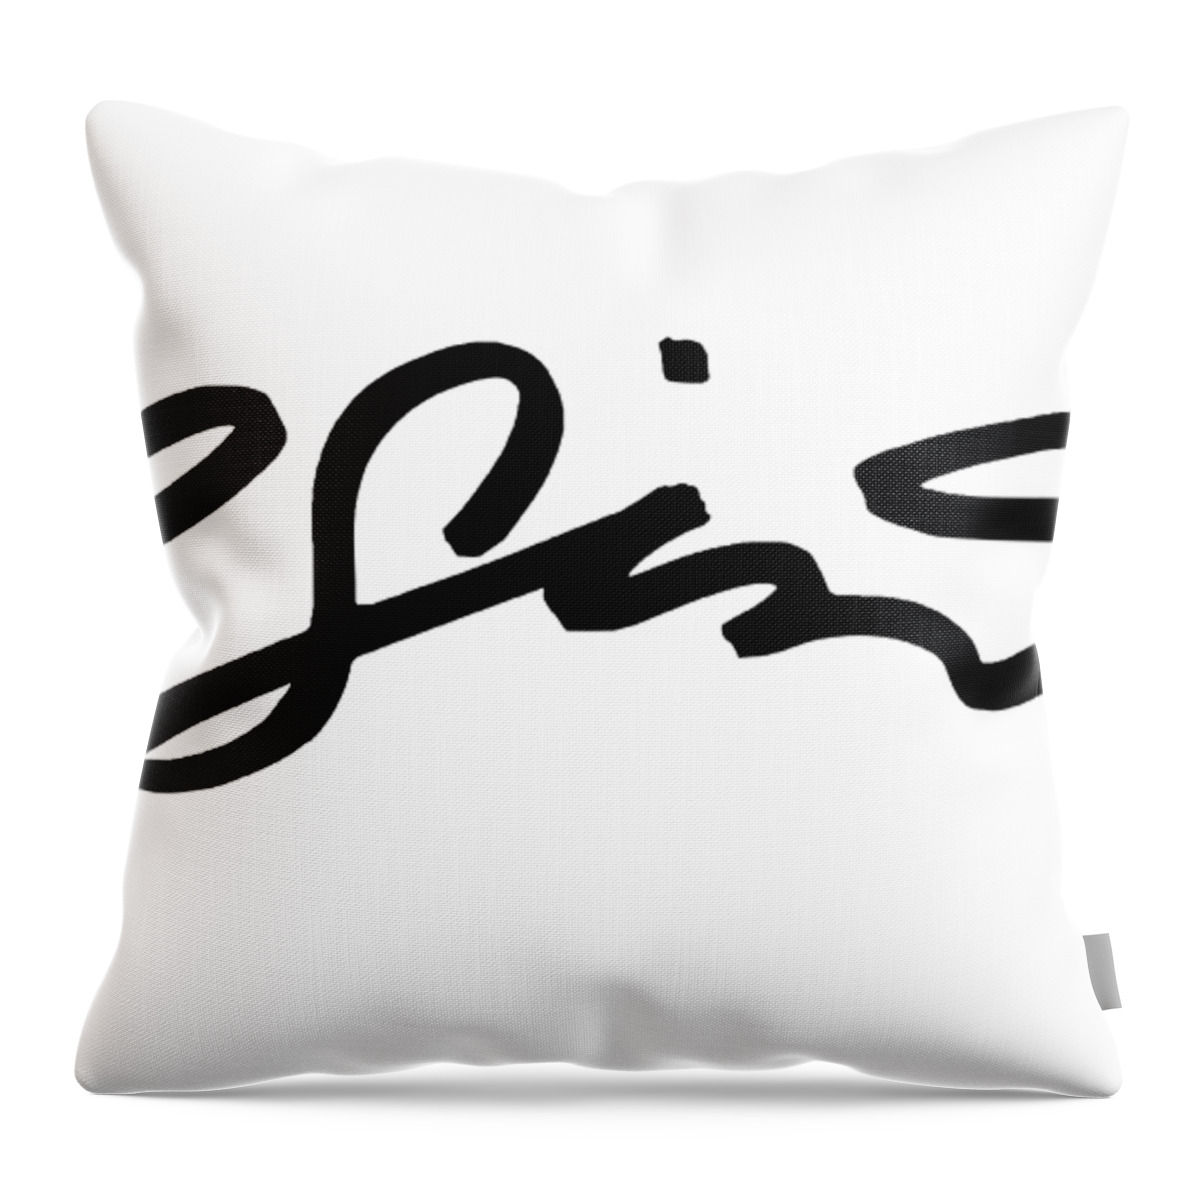  Throw Pillow featuring the digital art Nameplate by Clayton Singleton